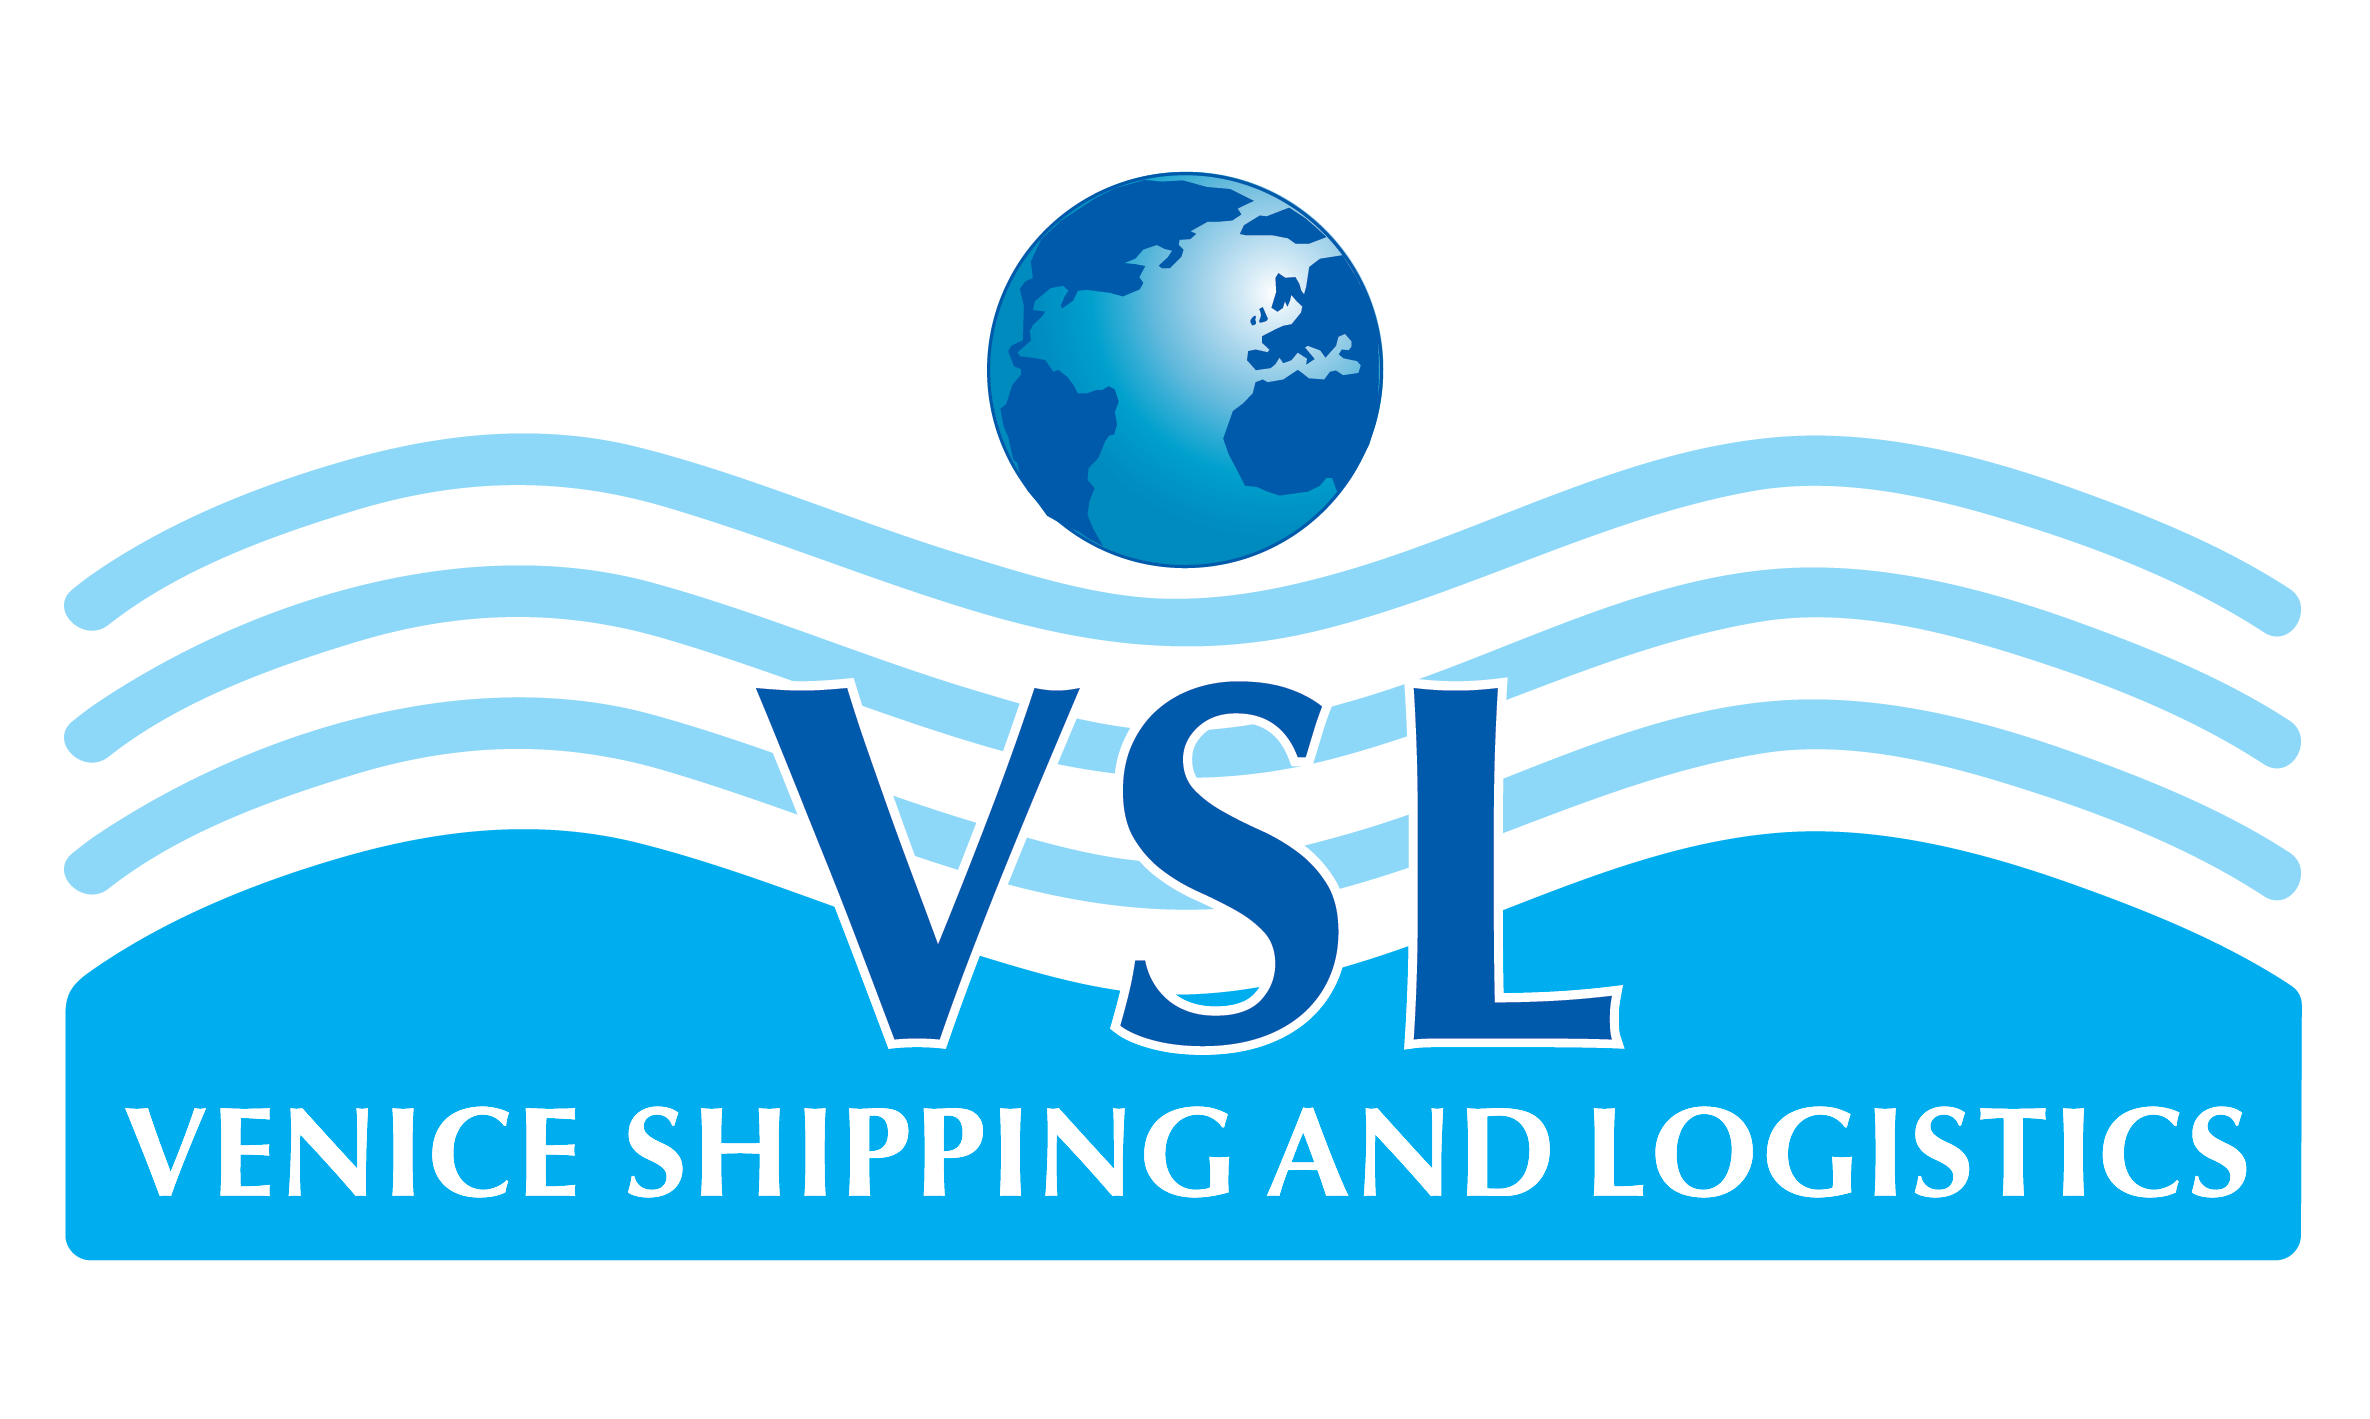 Venice Shipping and Logistics